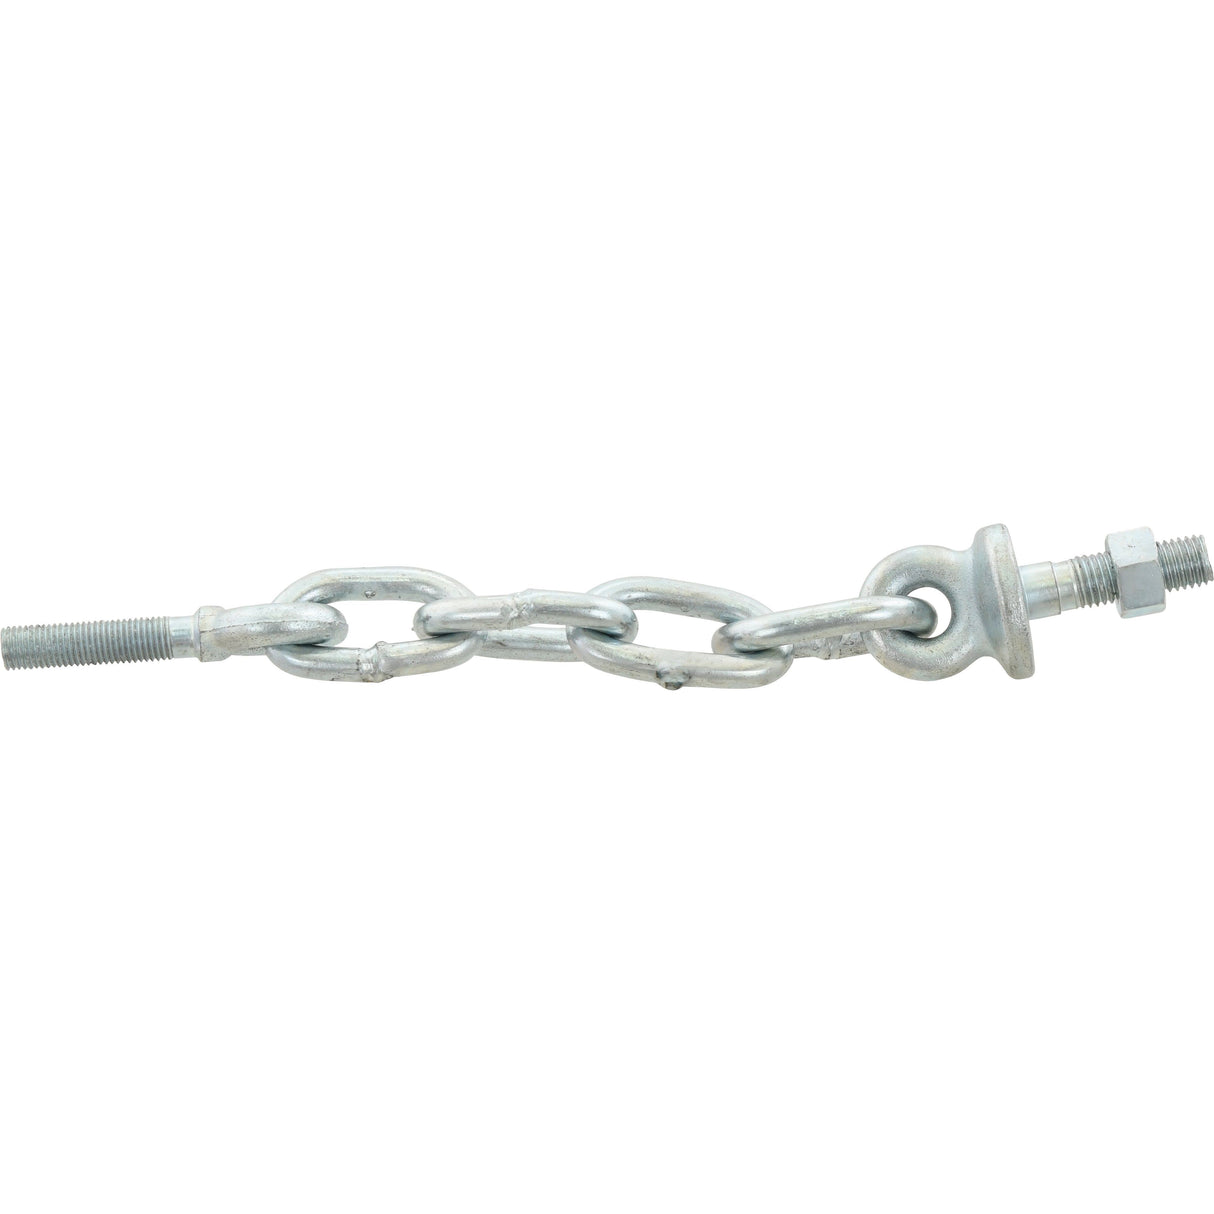 Check Chain Assembly
 - S.62494 - Farming Parts